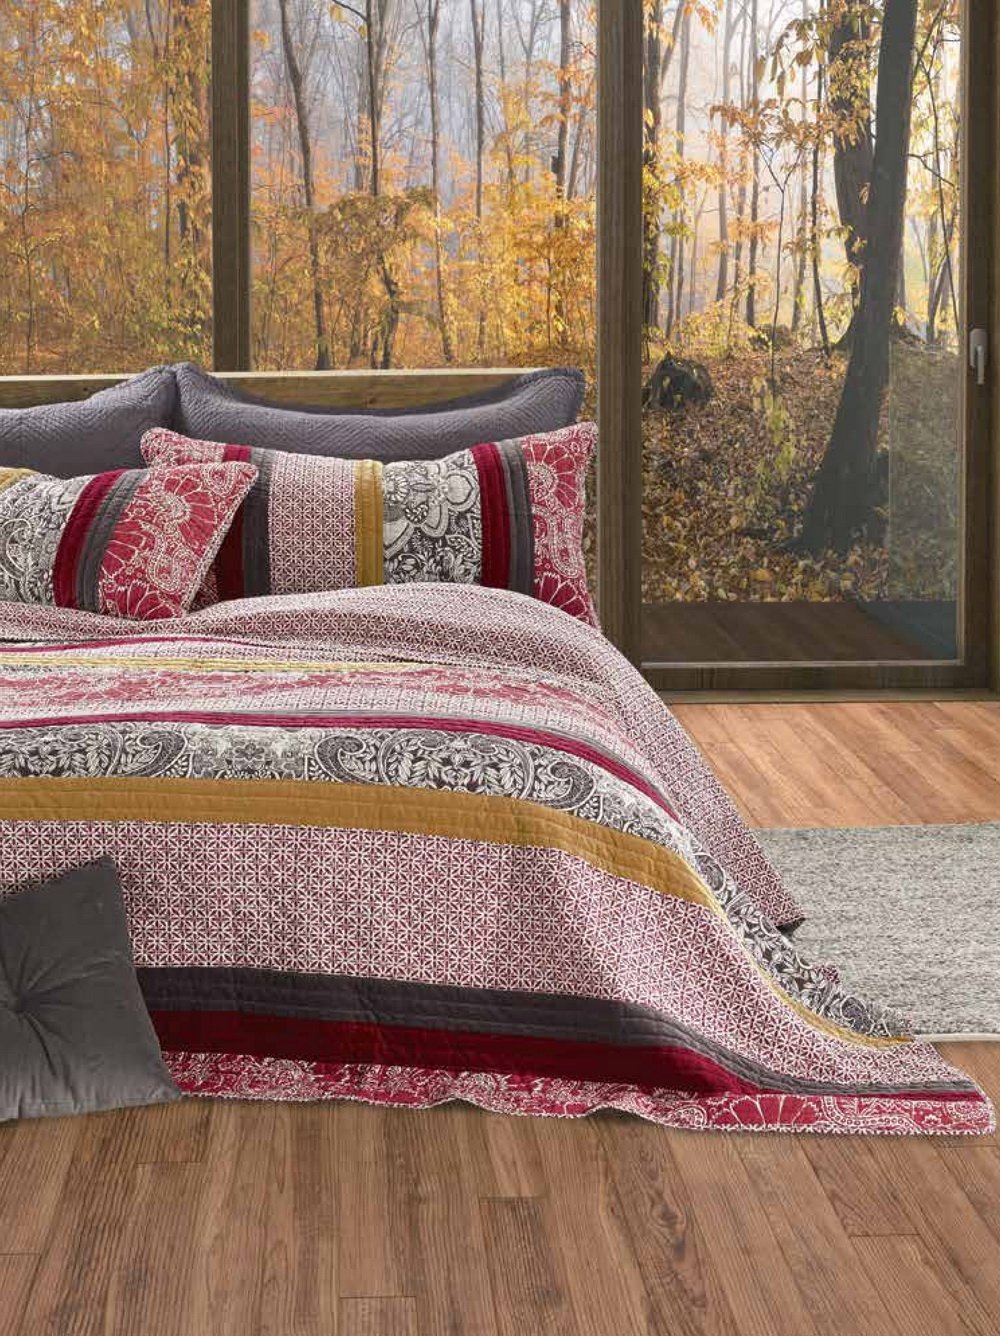 Anthropology, a Bedding collection from Brunelli